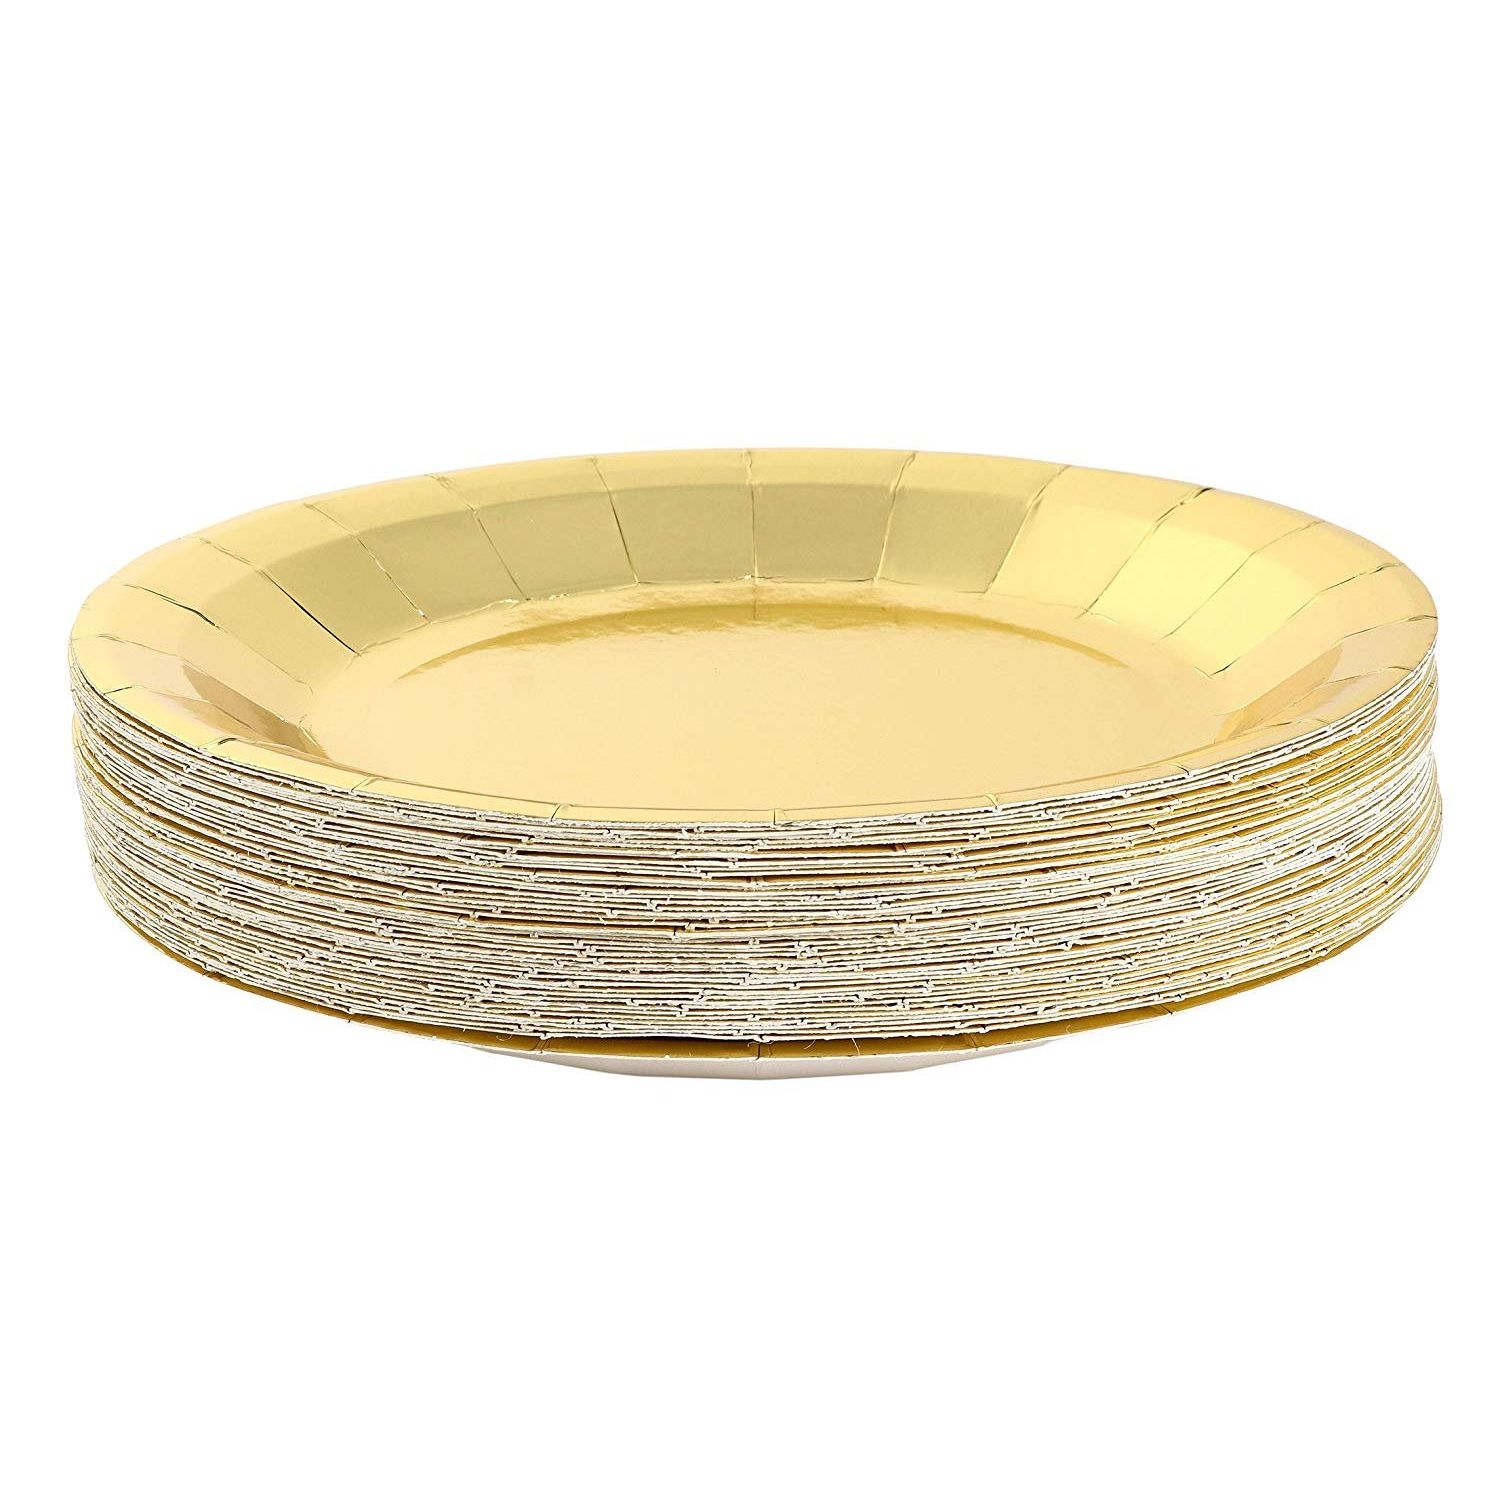 or Dessert Party Supplies for Appetizer Pack of 100 Gold Disposable Shiny Foil Paper Plates Round 9 Lunch Dinner 